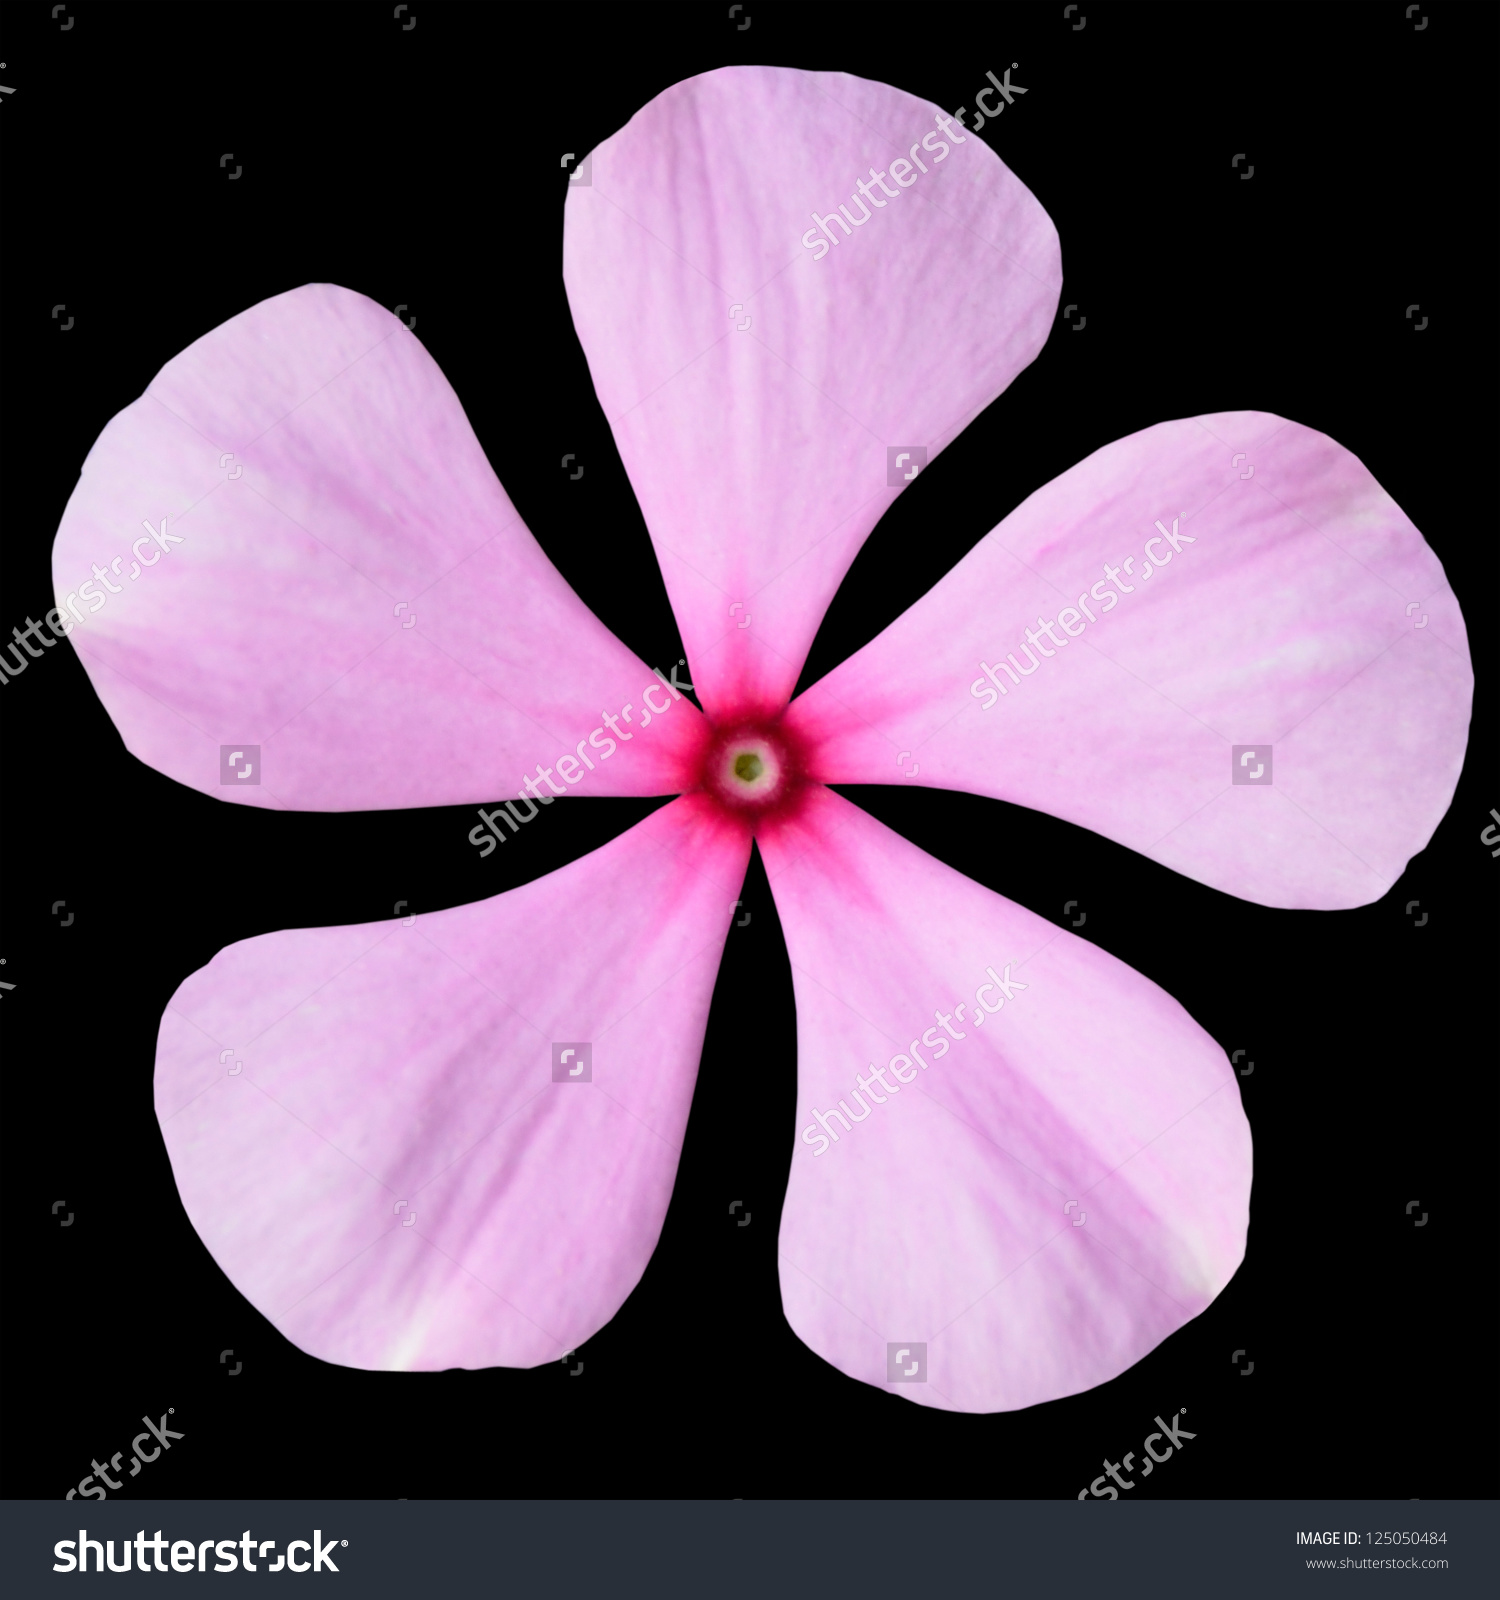 Pink Periwinkle Flower Red Center Madagascar Stock Photo 125050484.